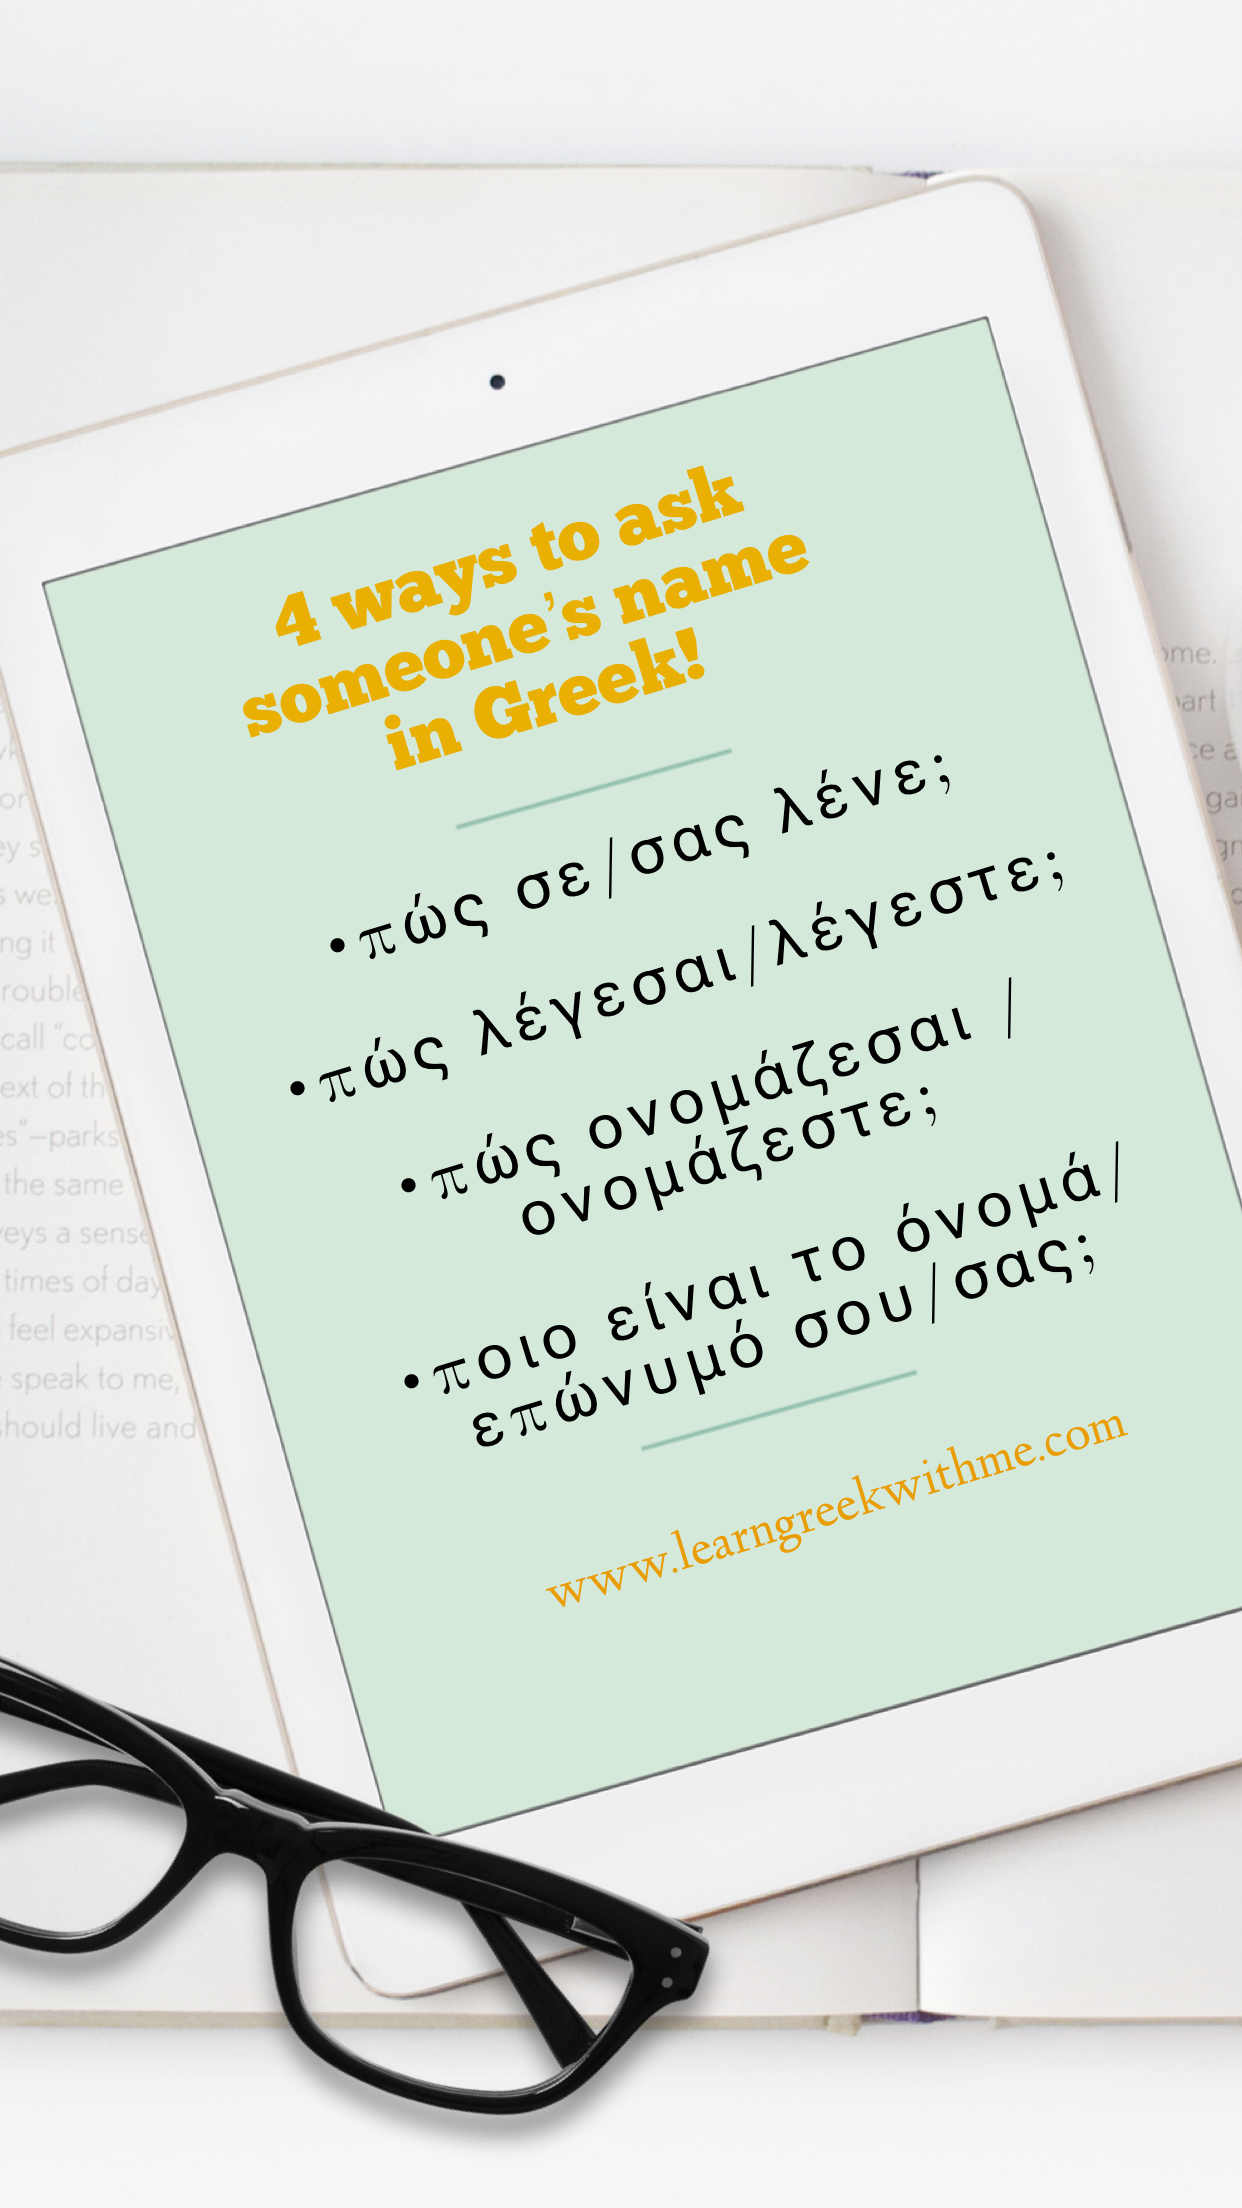 4 ways to ask someone’s name in Greek